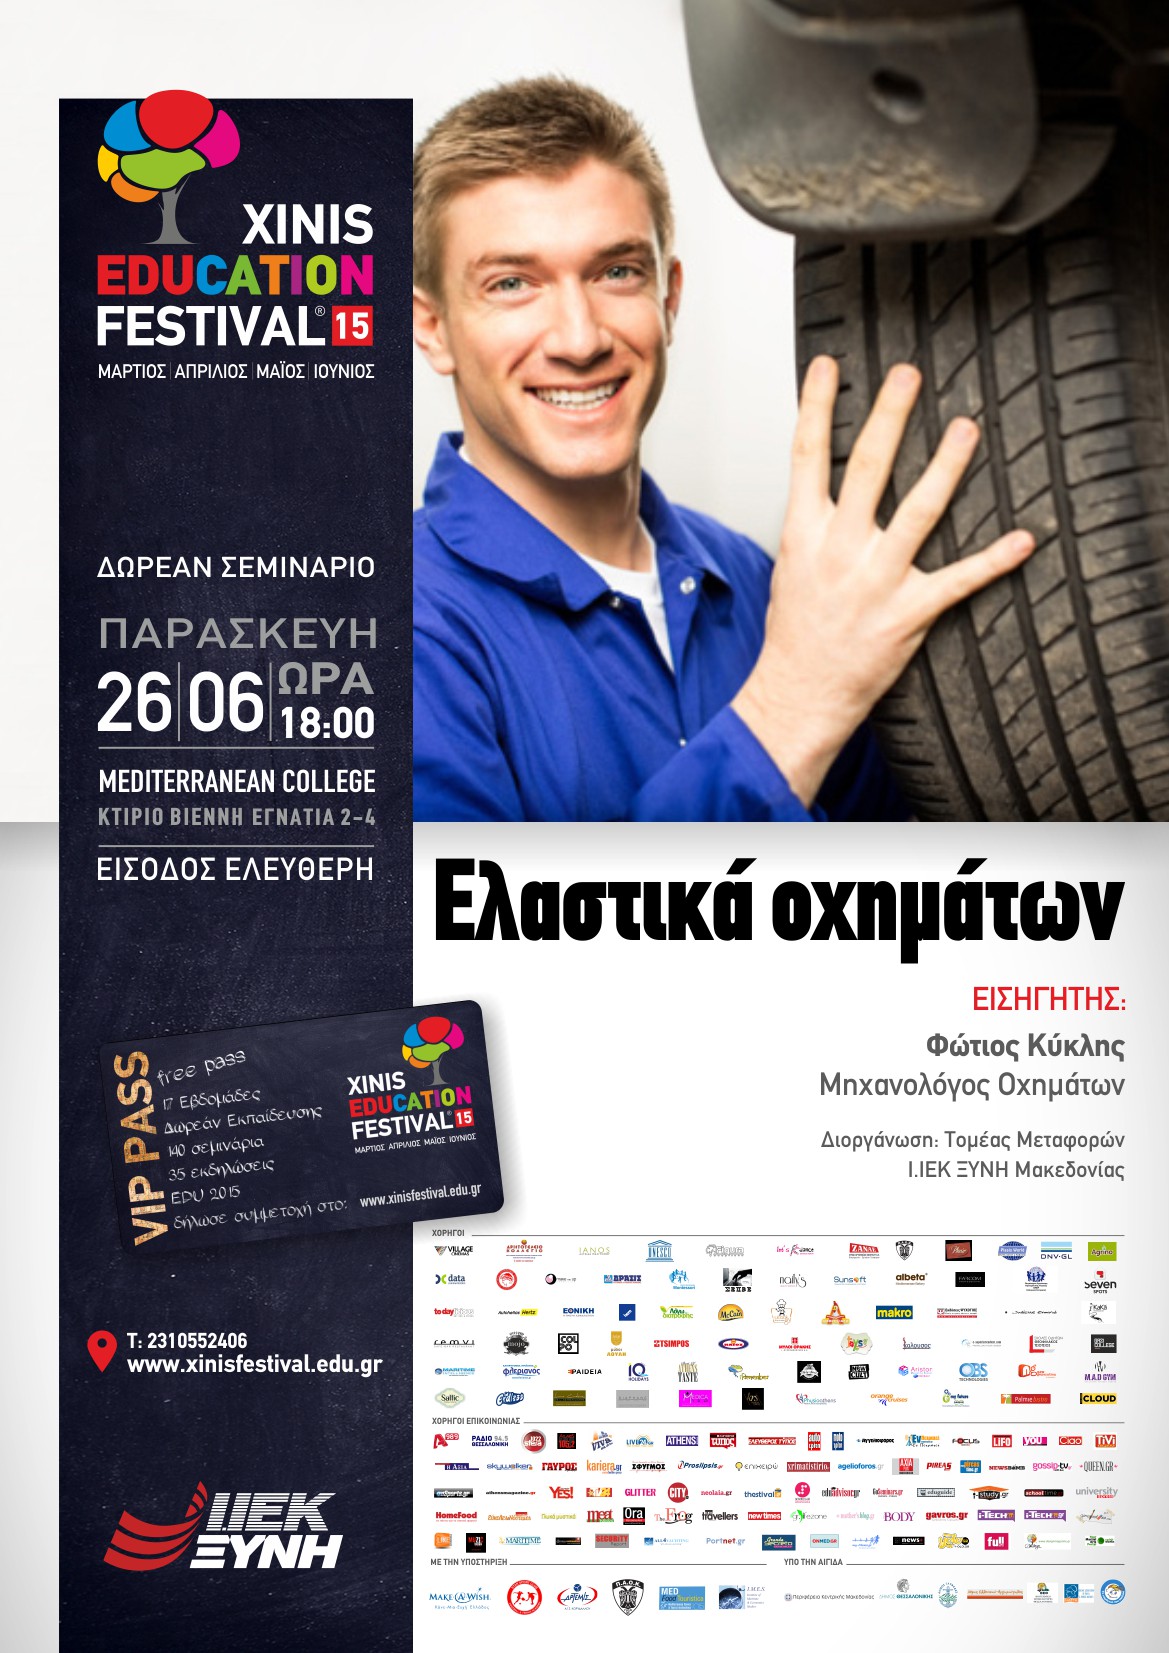 Xinis Education Festival 2015: All about Automotive @ ΙΕΚ ΞΥΝΗ Μακεδονίας!